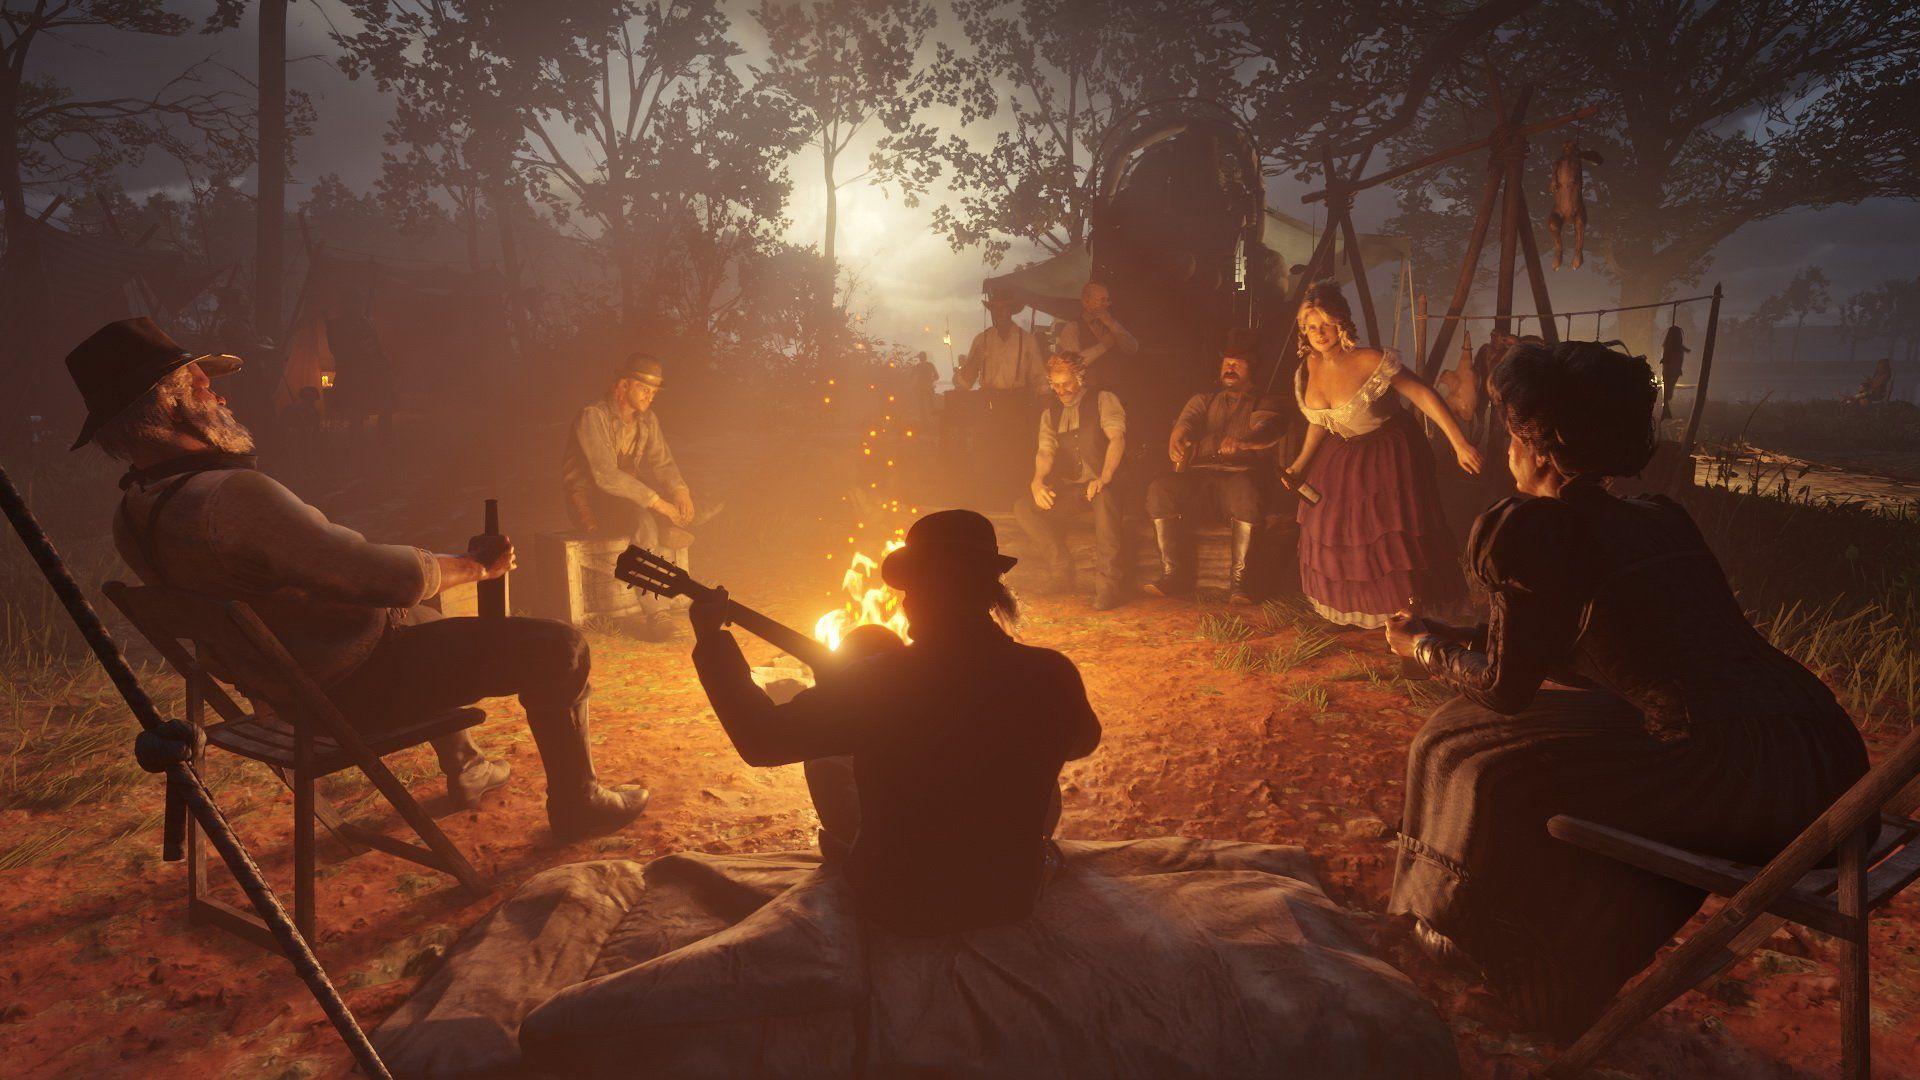 Red Dead Redemption 2 Unlock All Camp Upgrades and Max Supplies With